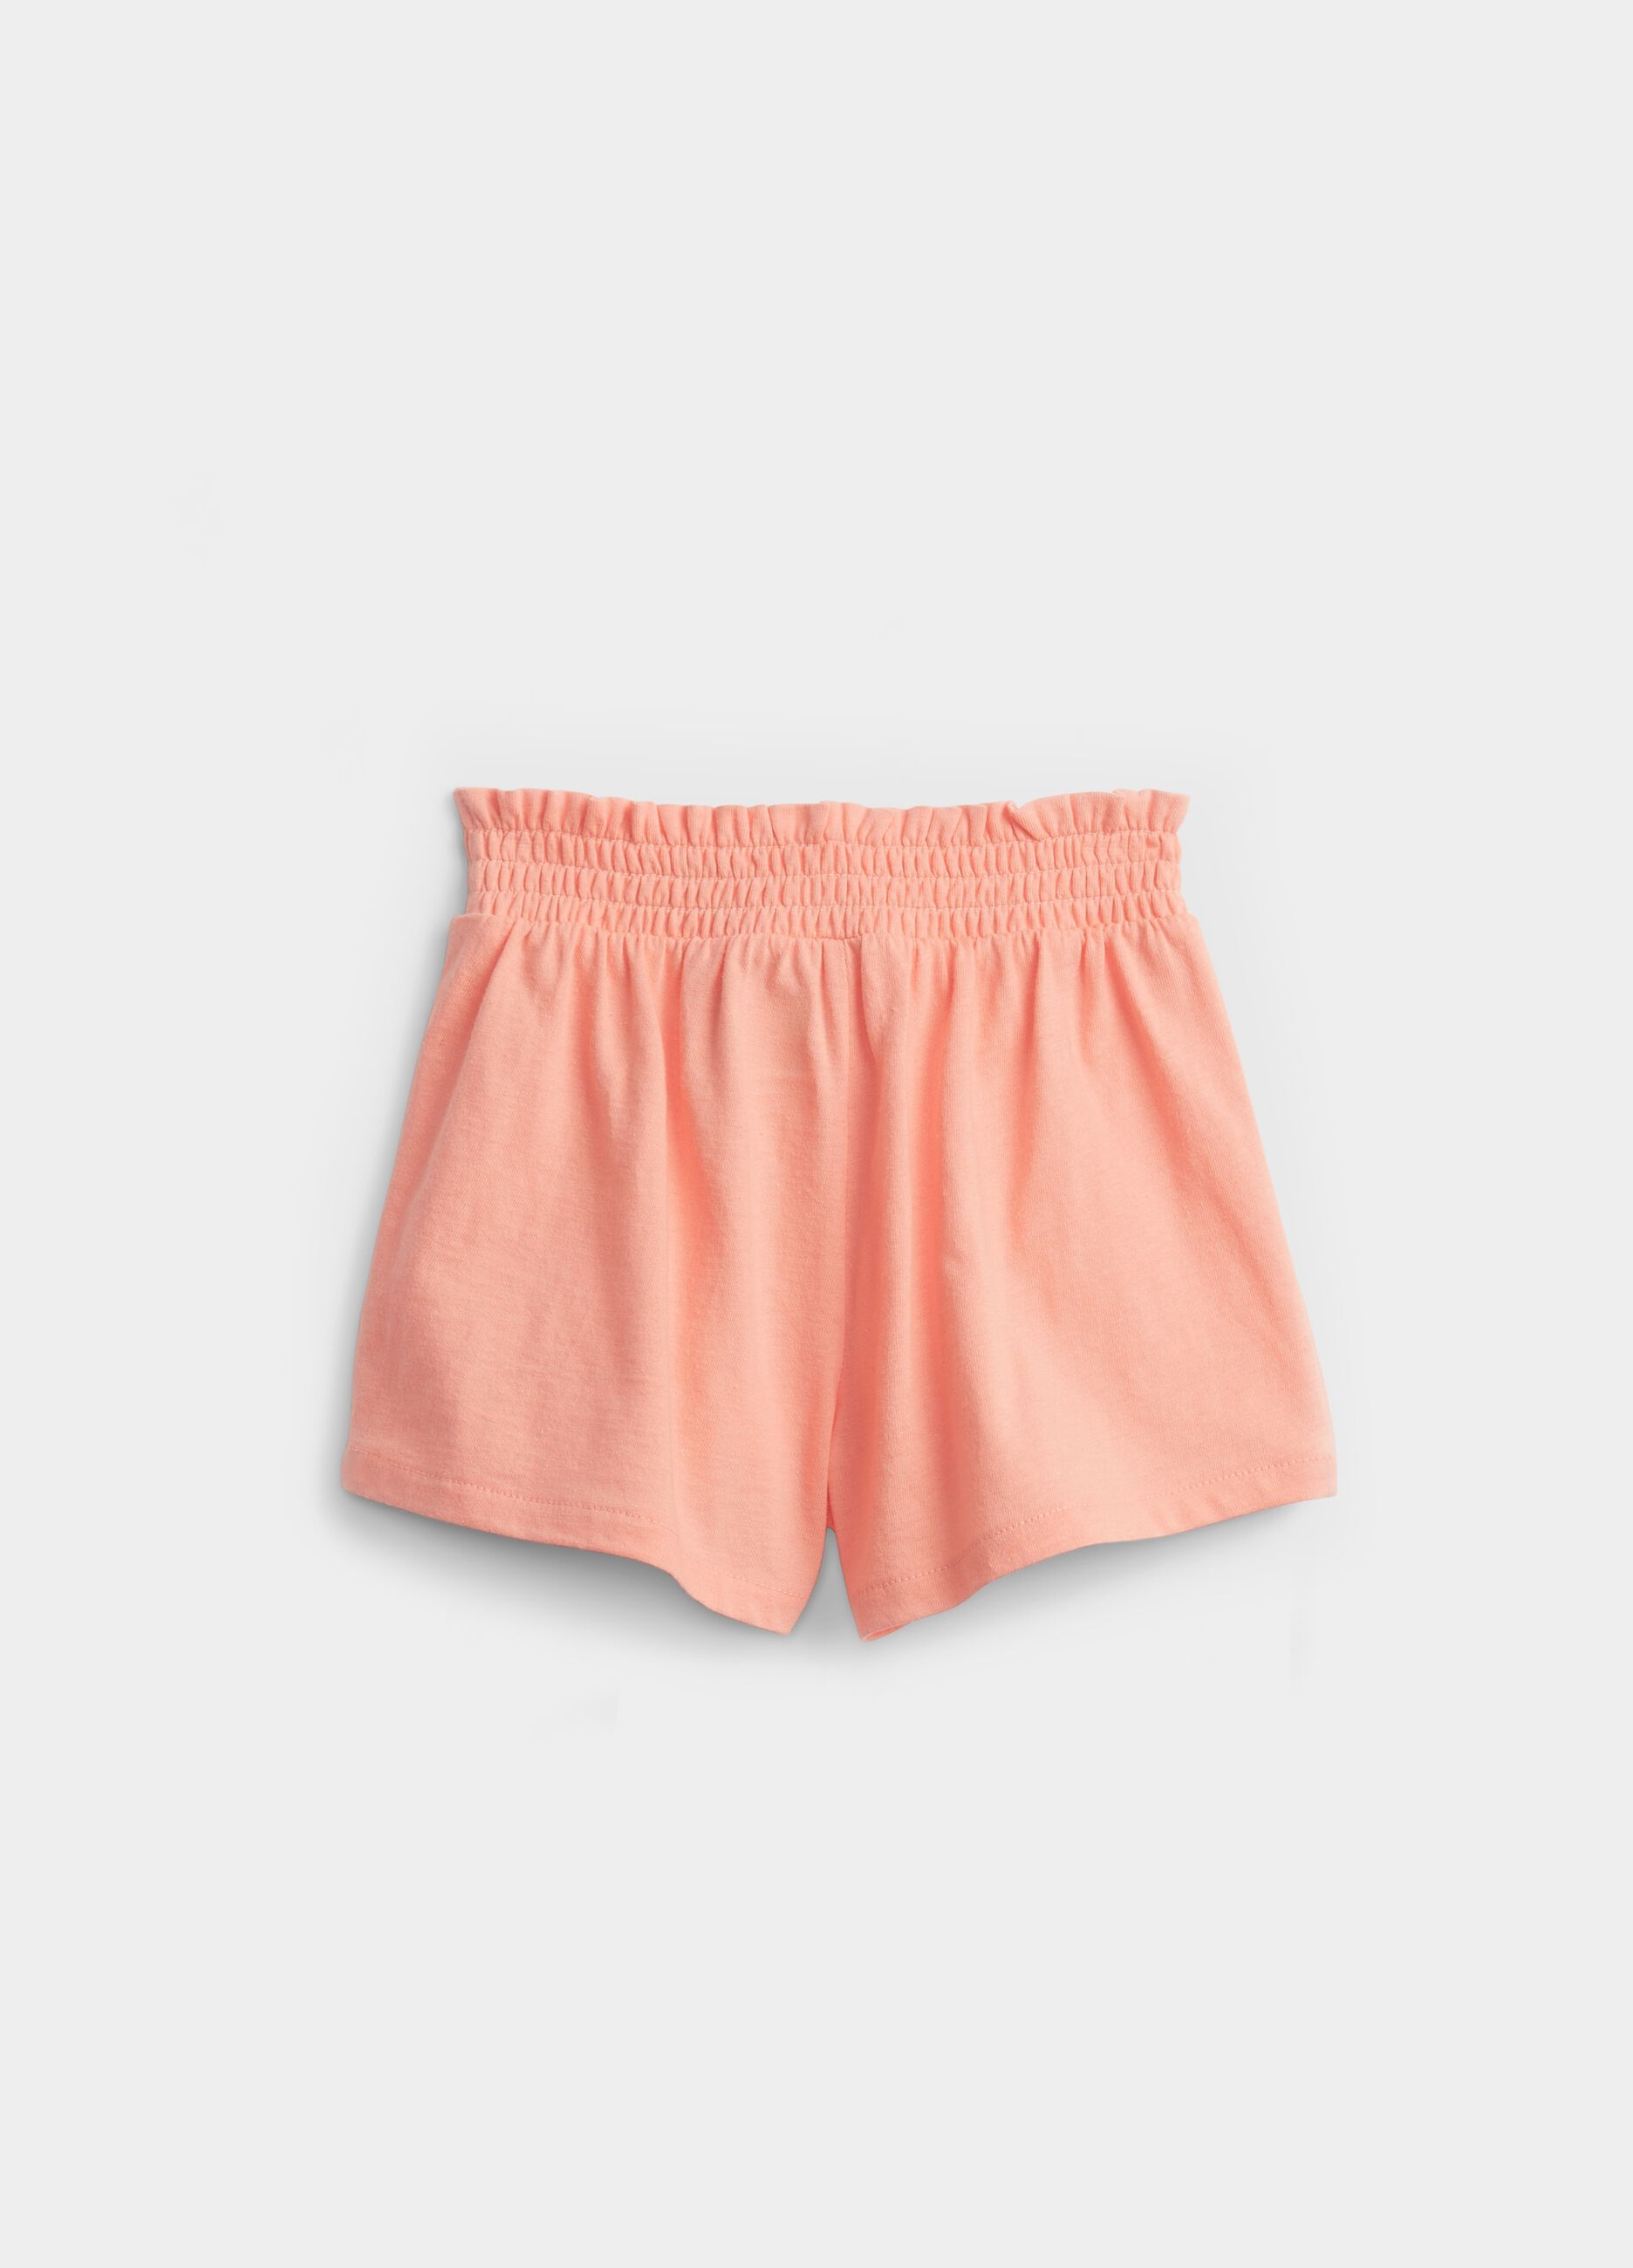 Cotton shorts with smocking